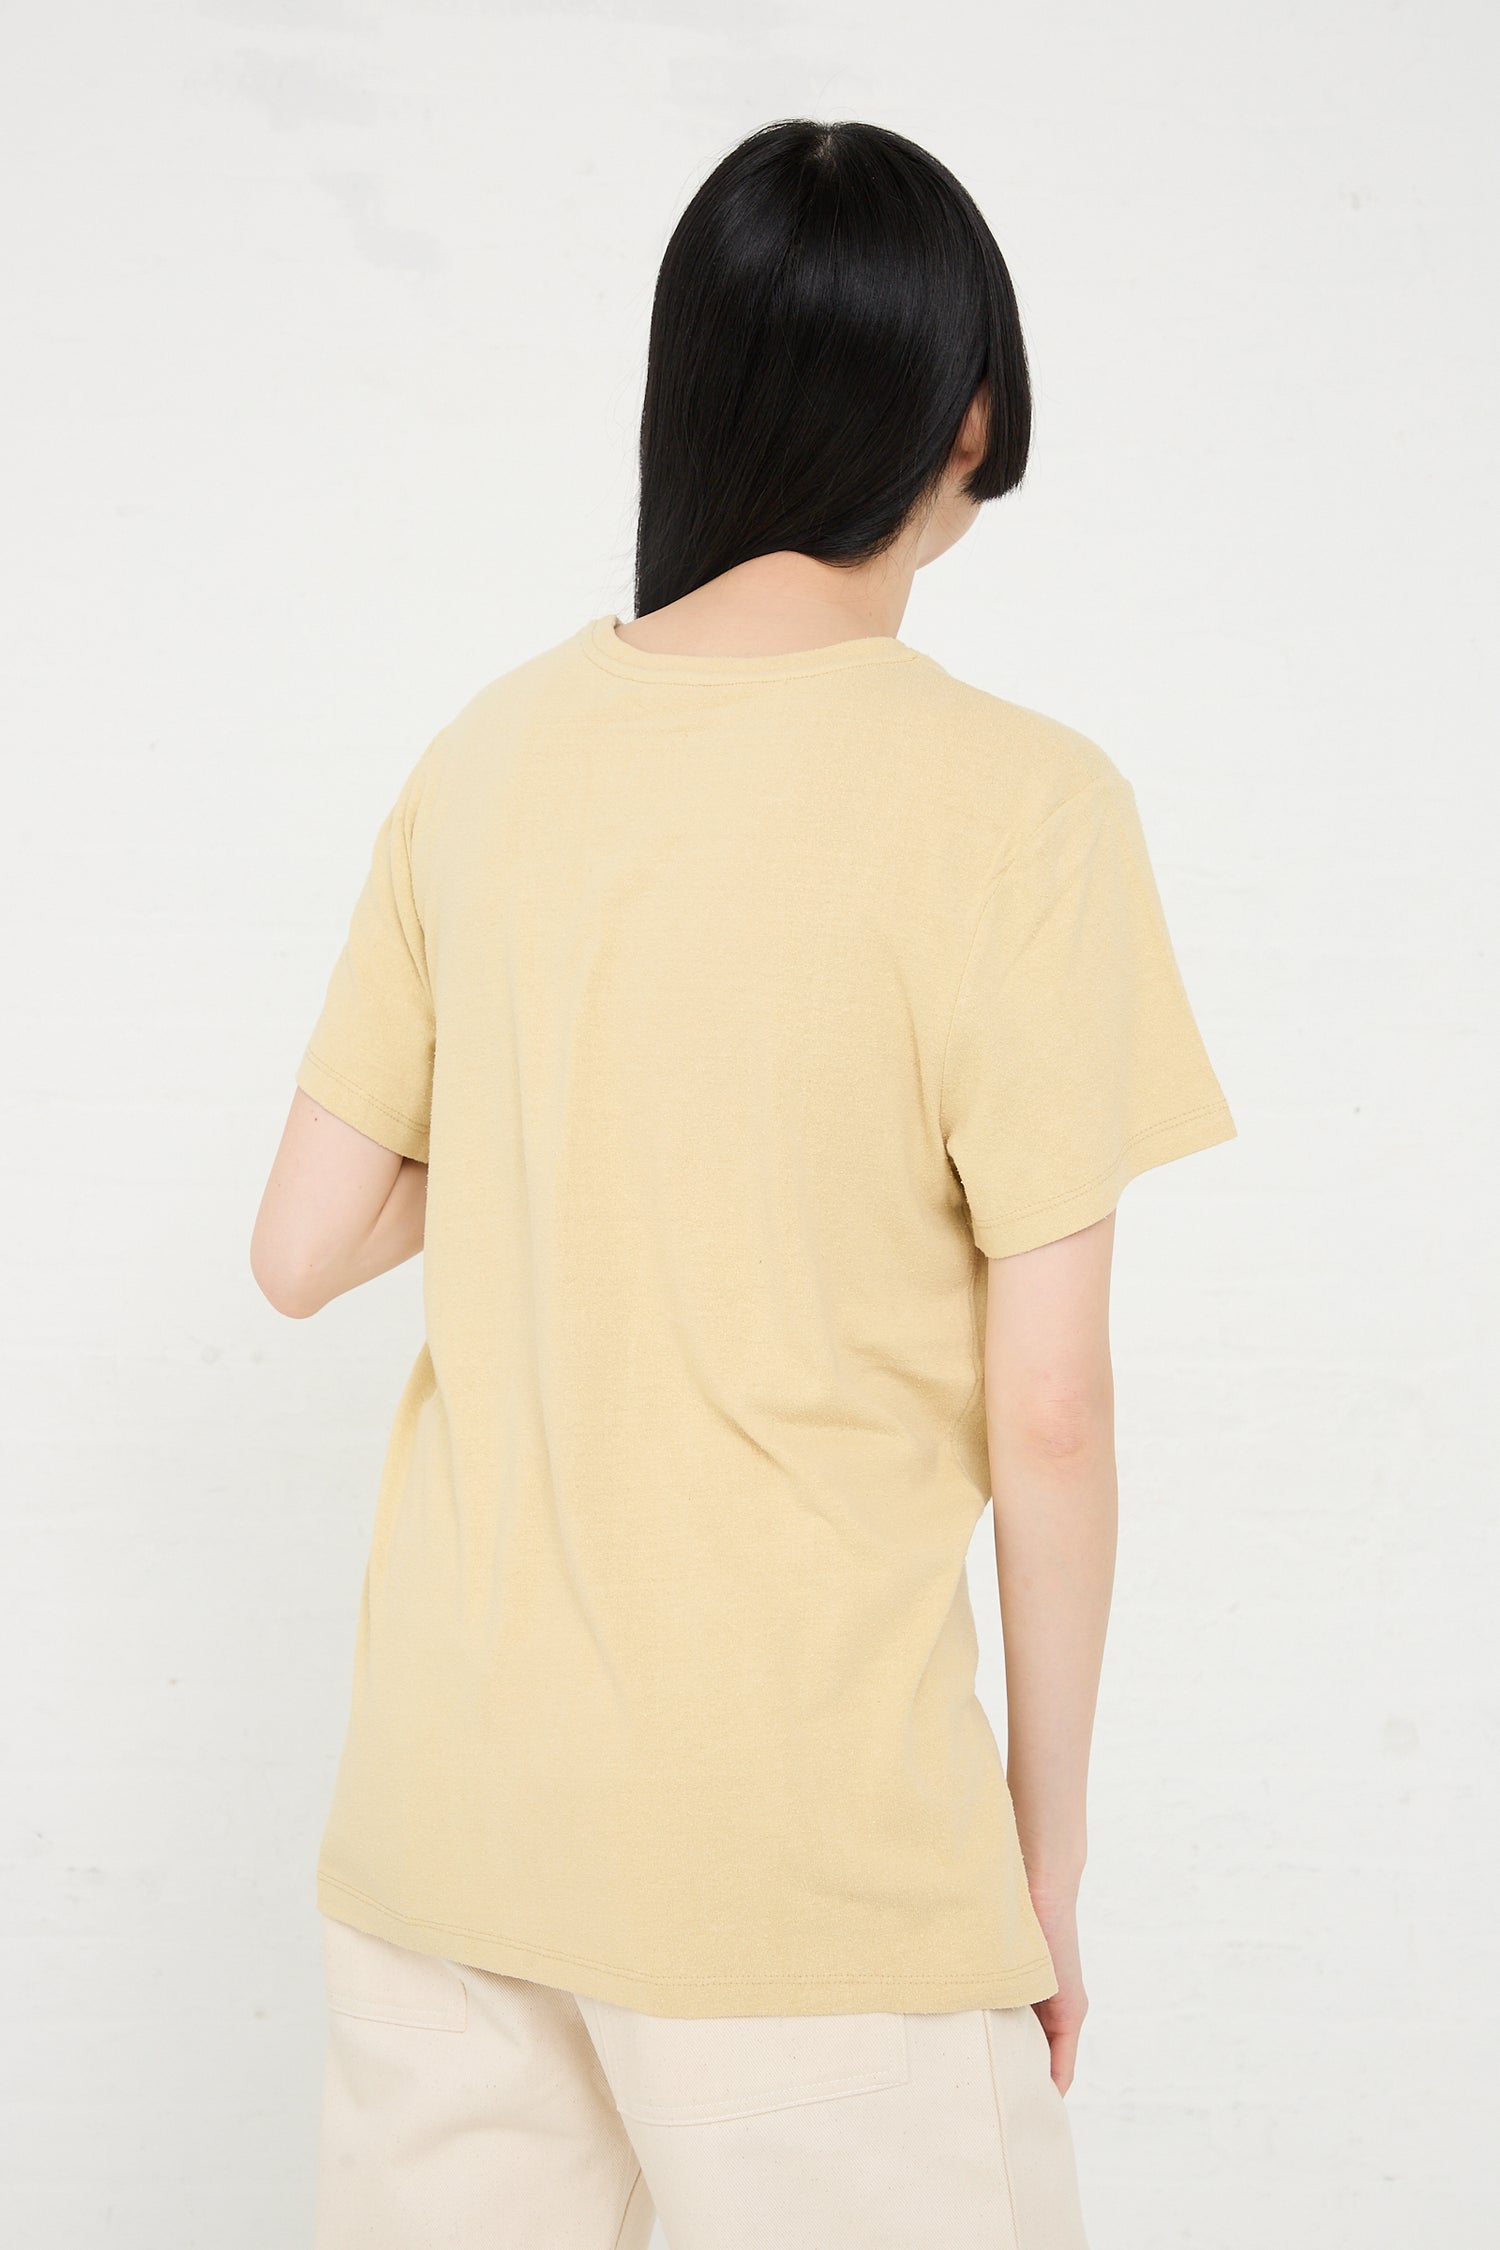 Woman from behind wearing a Baserange Wild Silk Jersey Tee in Oak Yellow sustainably produced and beige pants against a white background.